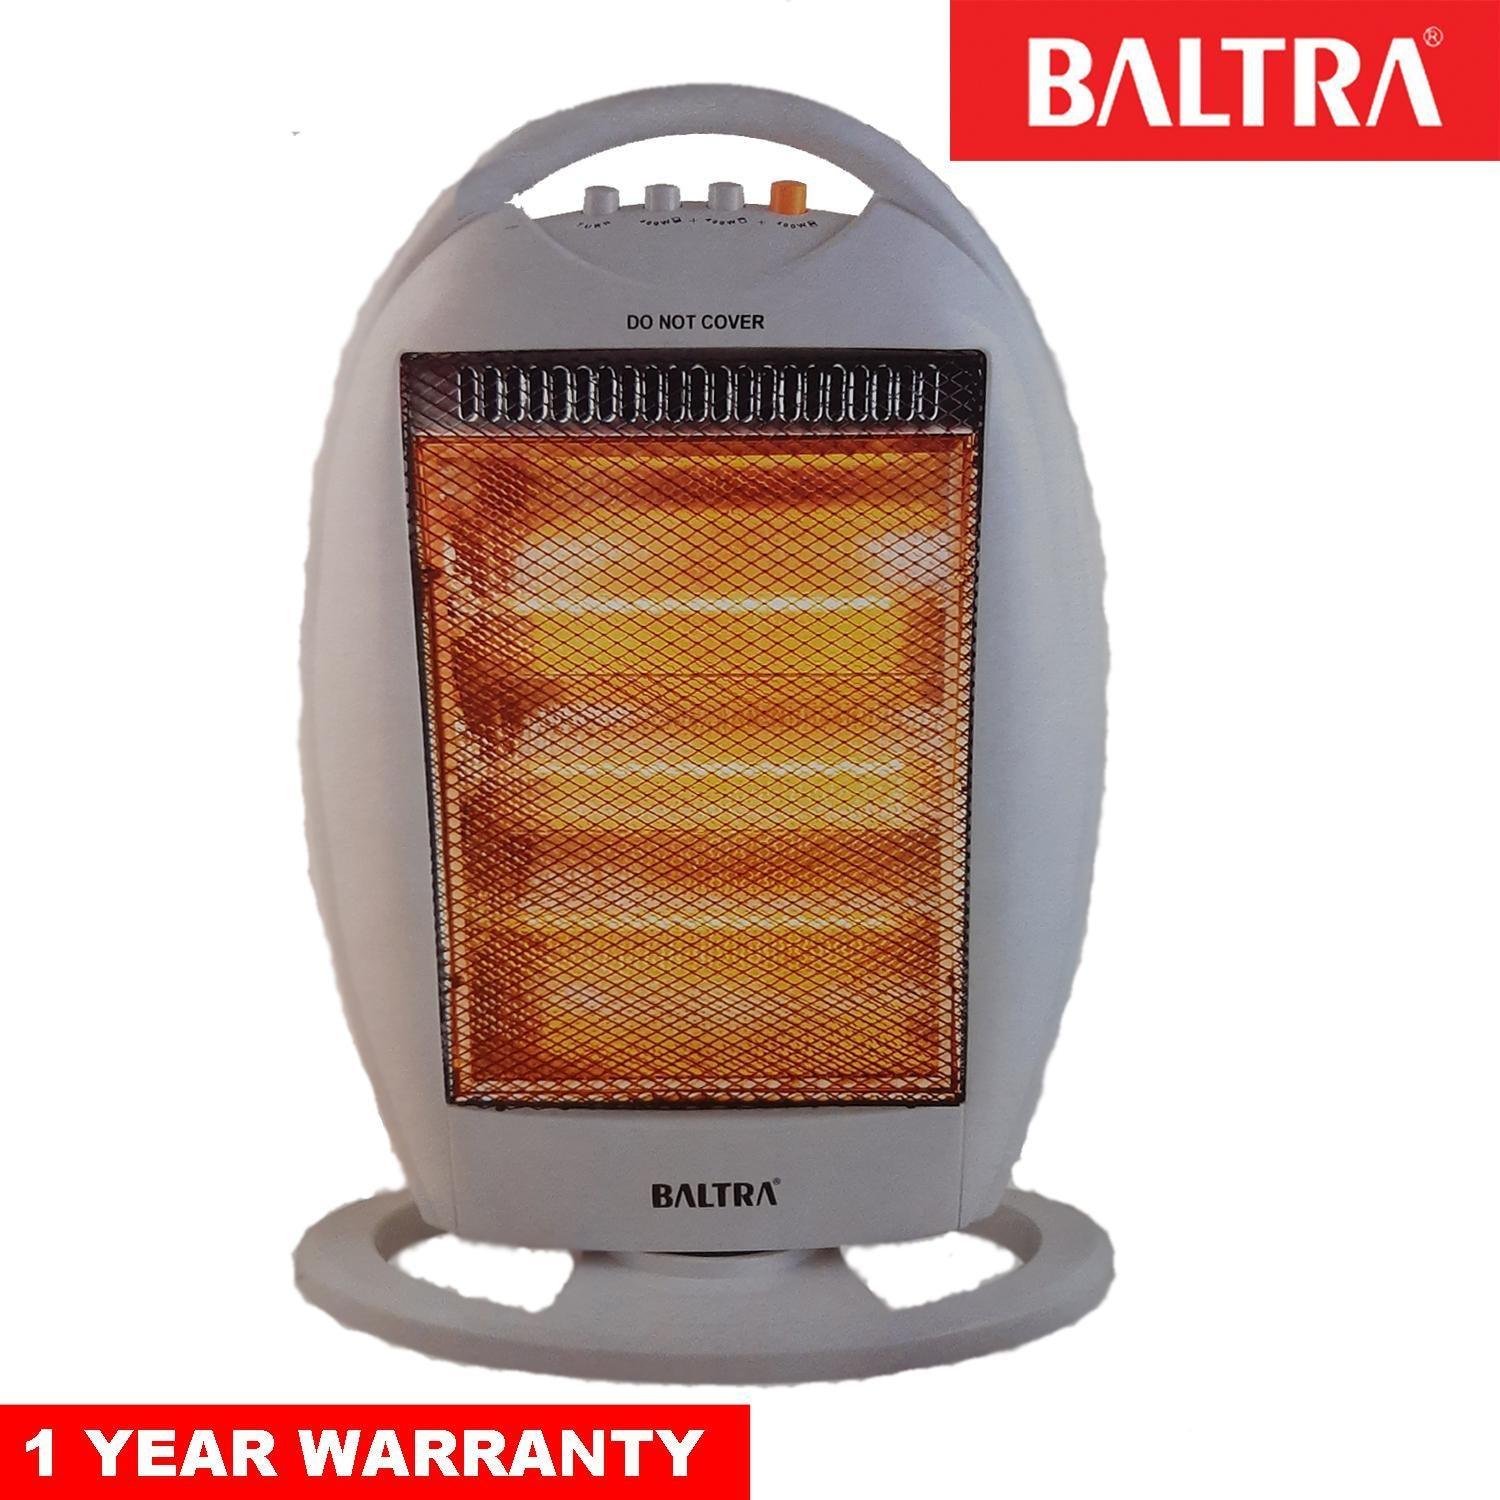 Baltra Halogen Heater Dream BTH 134 best trusted and 1 year  warranty - Brother-mart